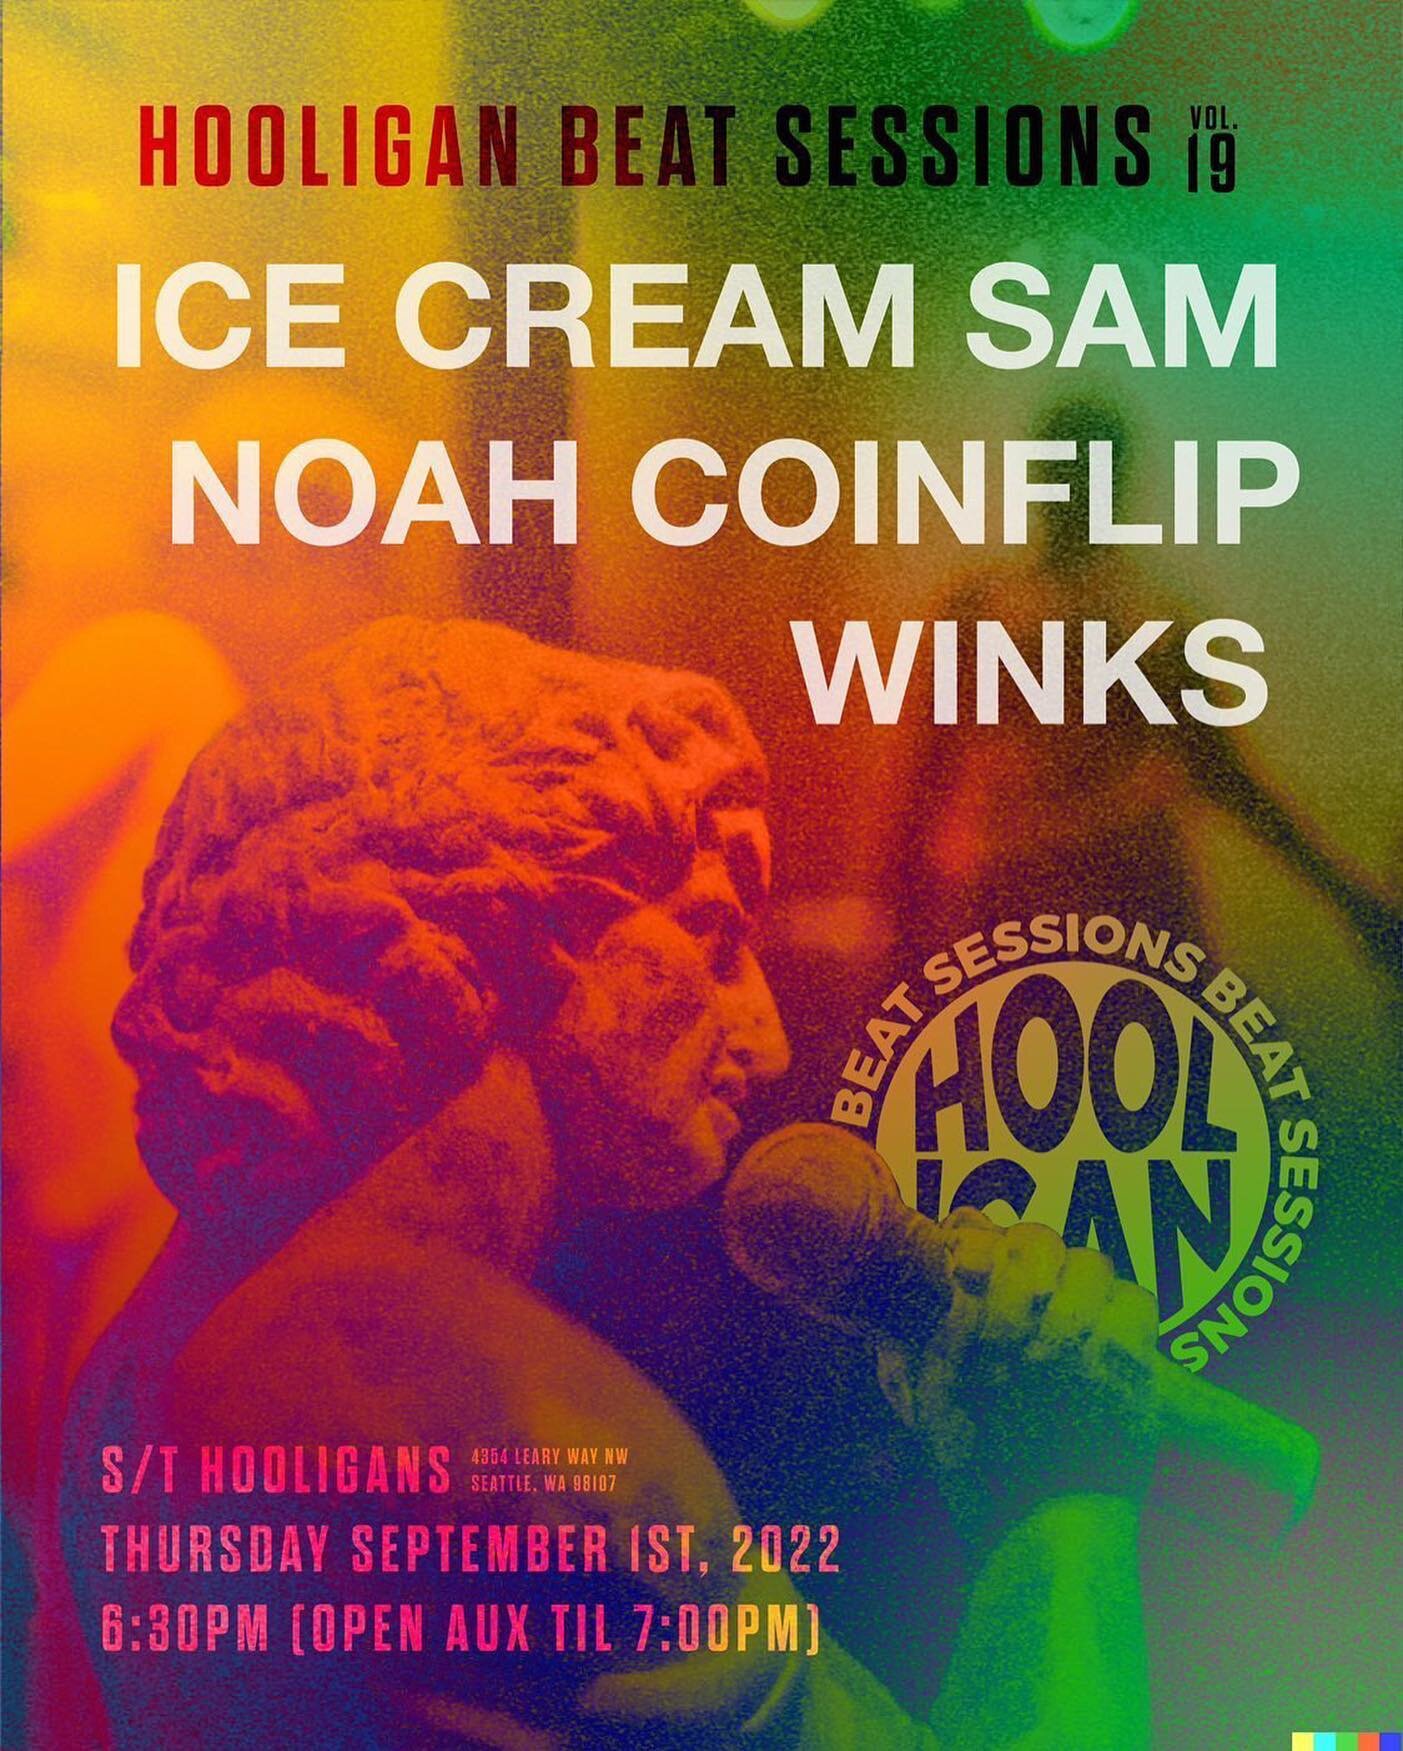 S/T Hooligans, September 1st. Come grab some dinner and enjoy music by Me, Noah Coinflip, and Ice Cream Sam.
.
:
.
:
.
:
#beats #producer #producershowcase #beatsession #hooliganbeatsessions #seattleproducer #seattlemusic  #livemusic